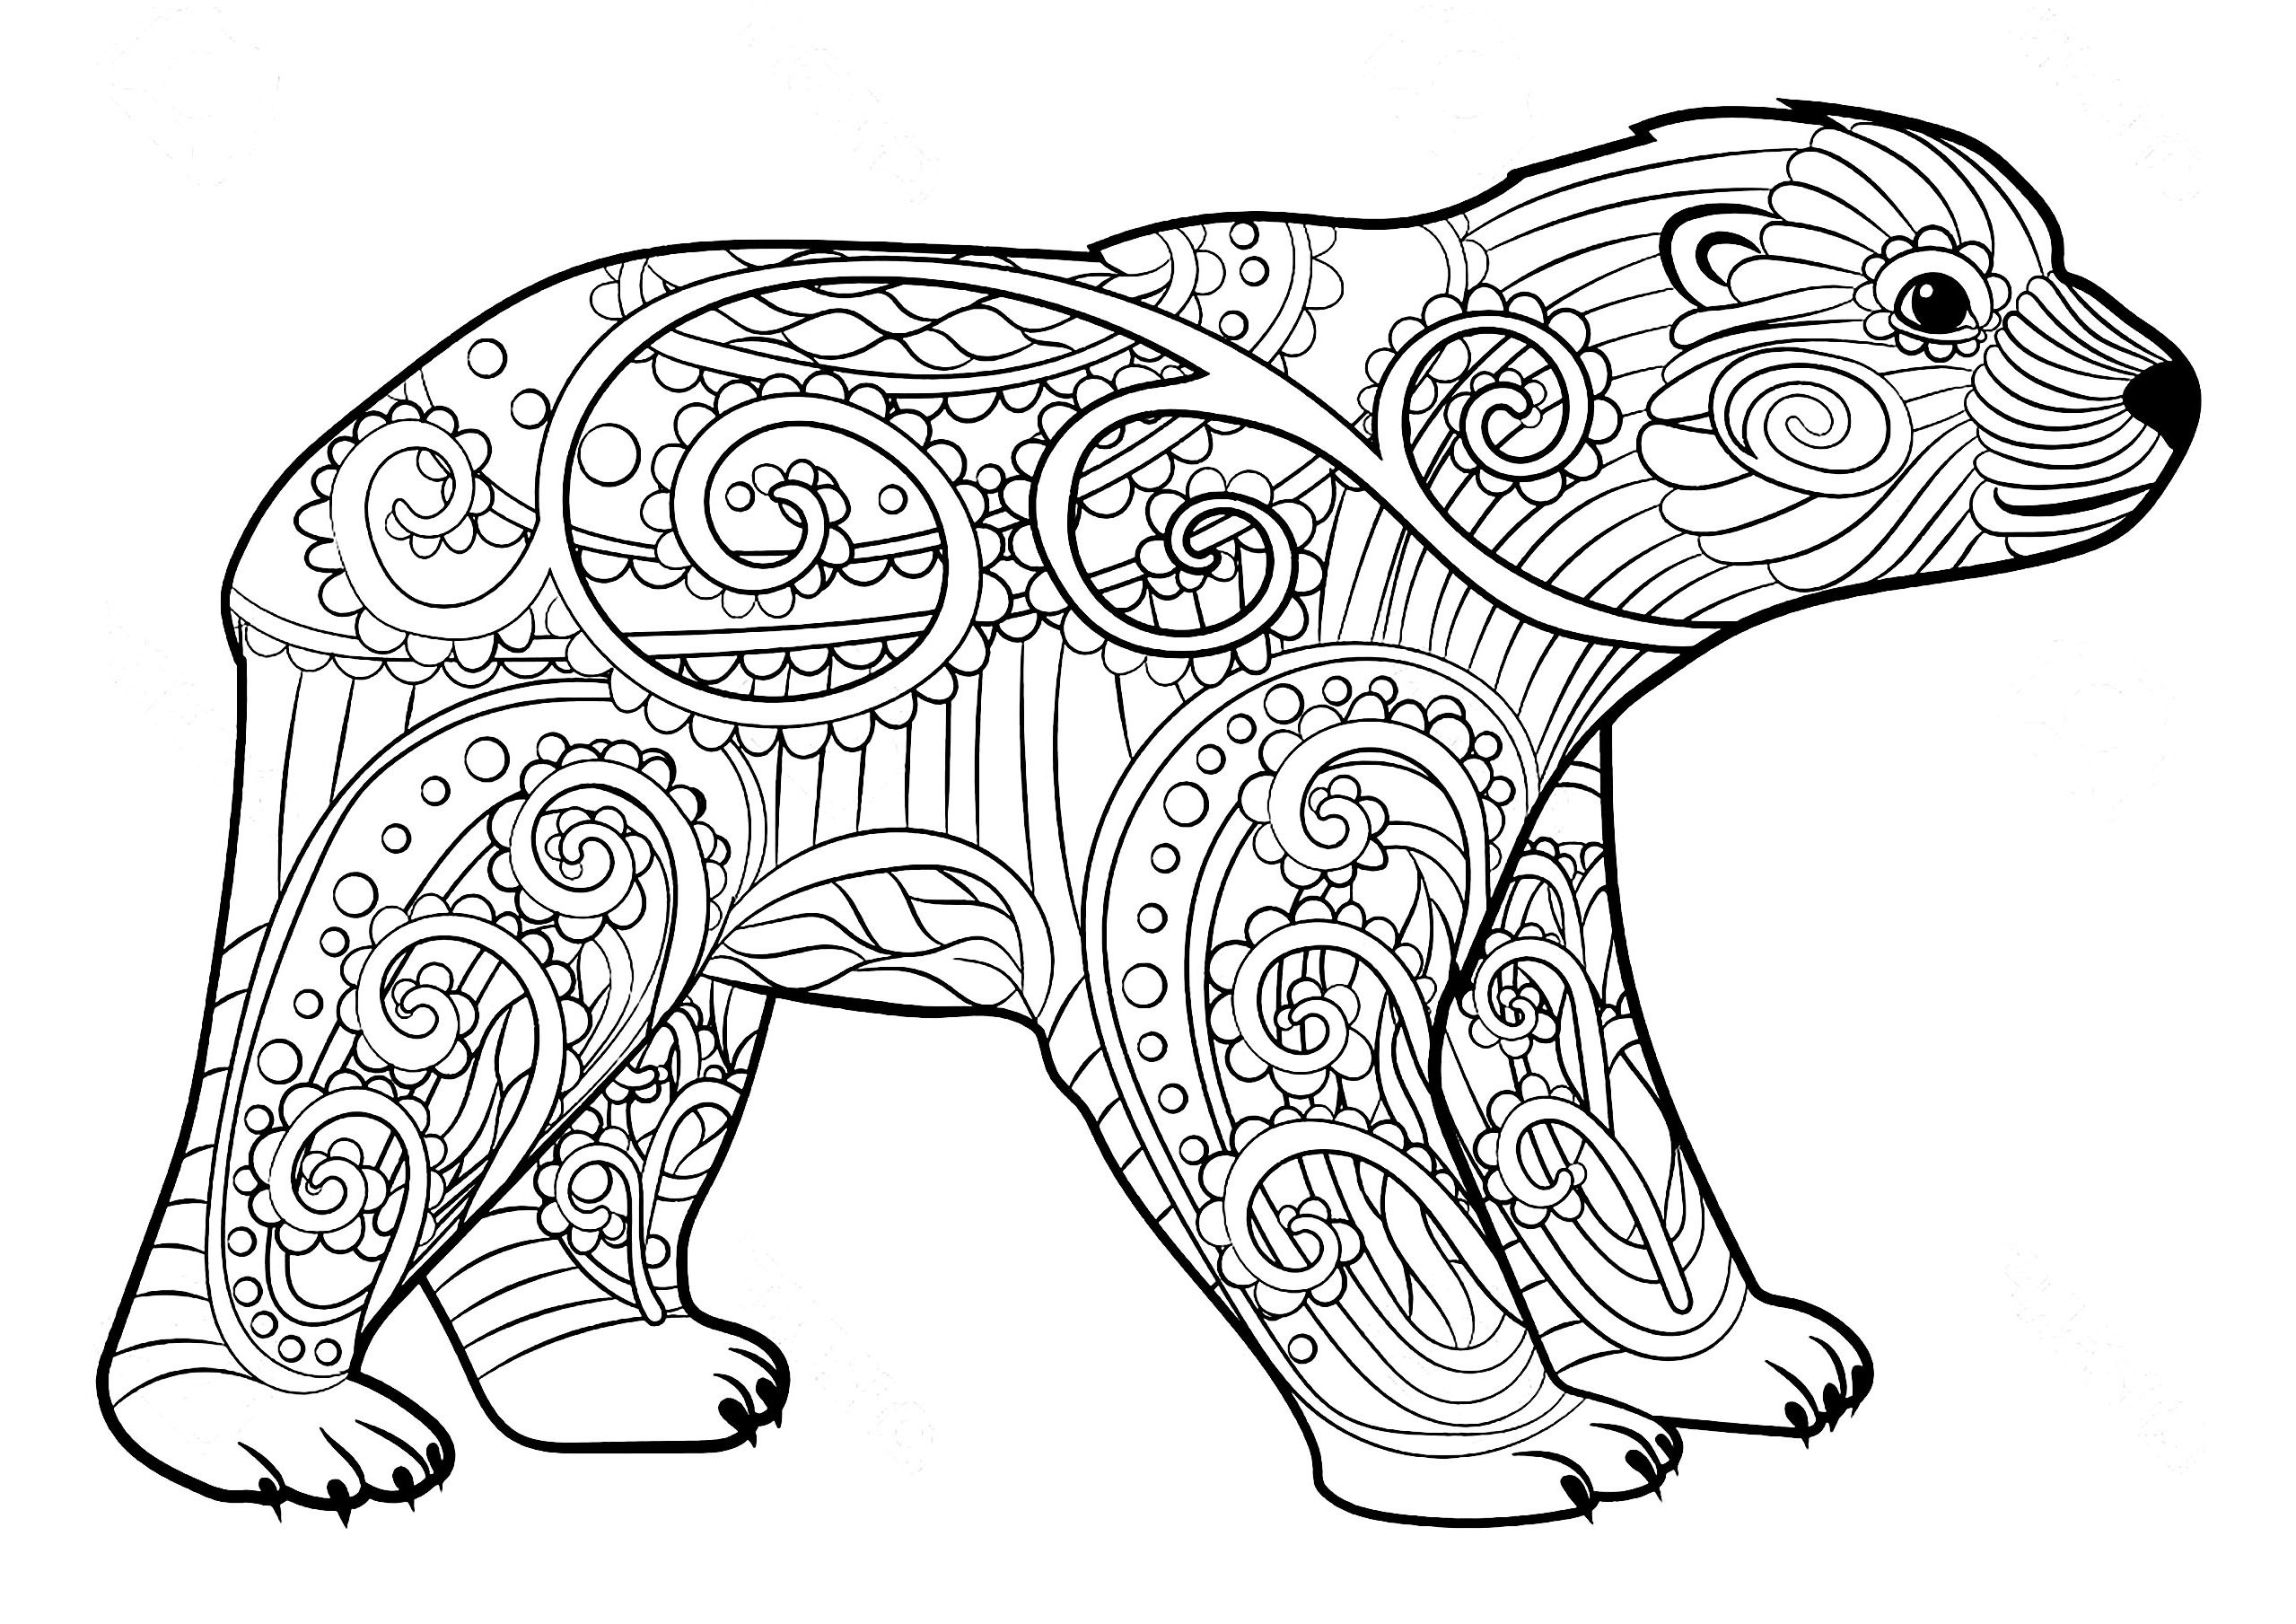 Coloring Websites For Kids
 Bears to color for kids Bears Kids Coloring Pages